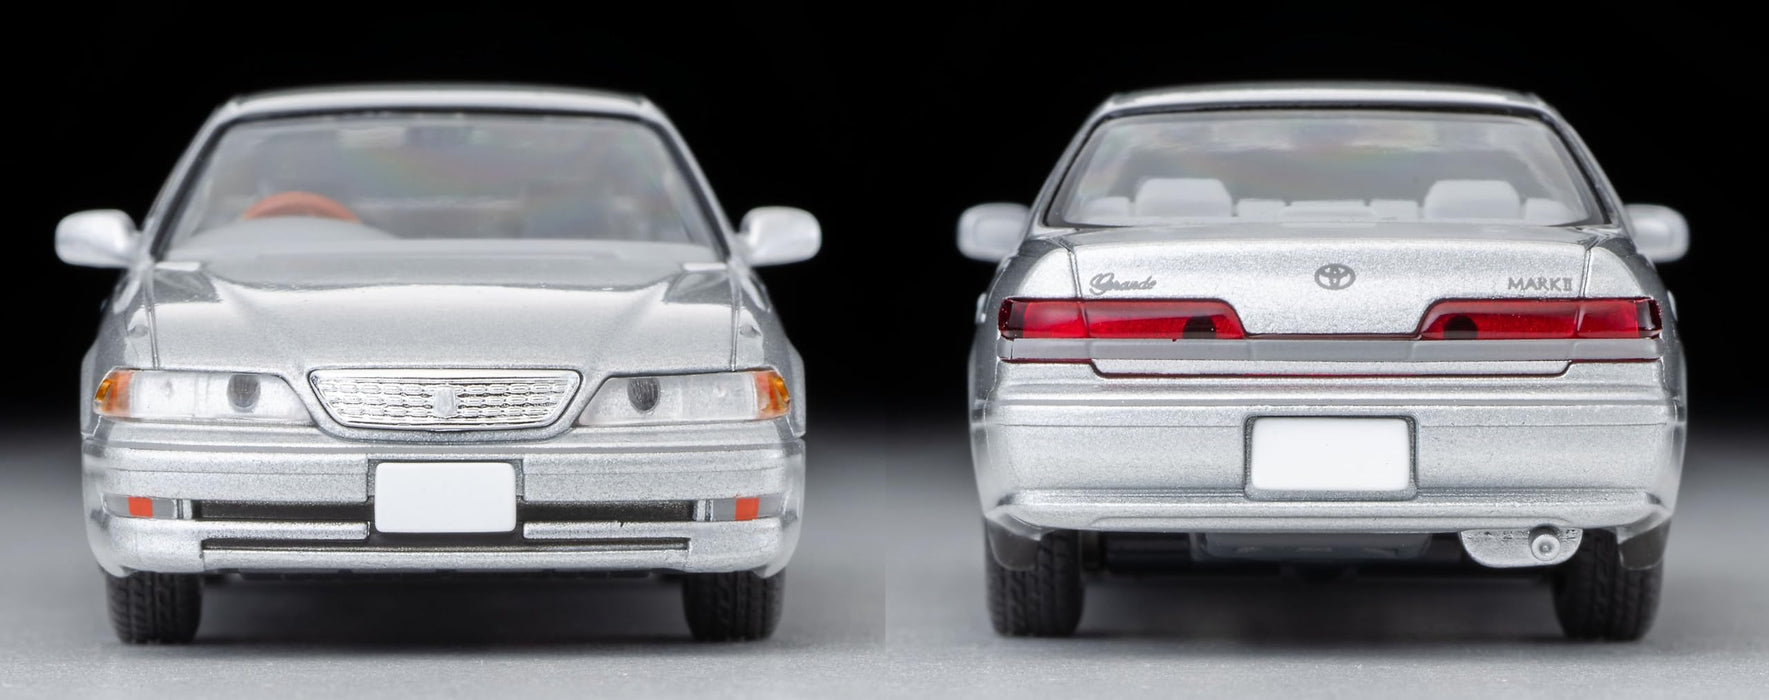 1/64 Scale Tomica Limited Vintage NEO TLV-N311b Toyota Mark II 2.0 Grande (Silver) 1998